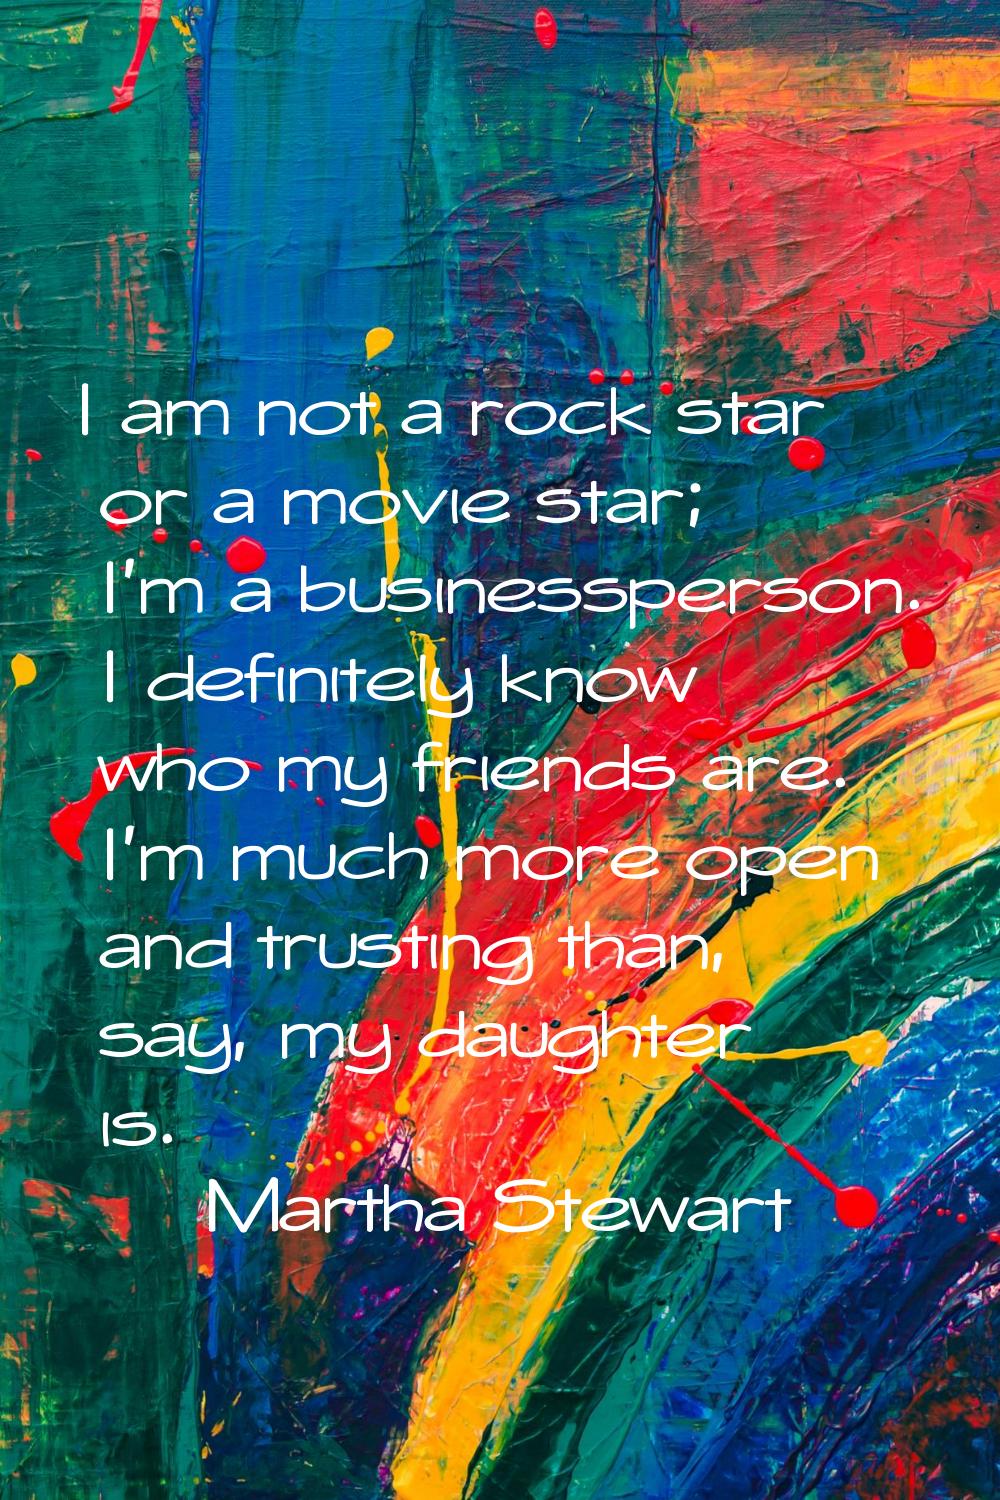 I am not a rock star or a movie star; I'm a businessperson. I definitely know who my friends are. I